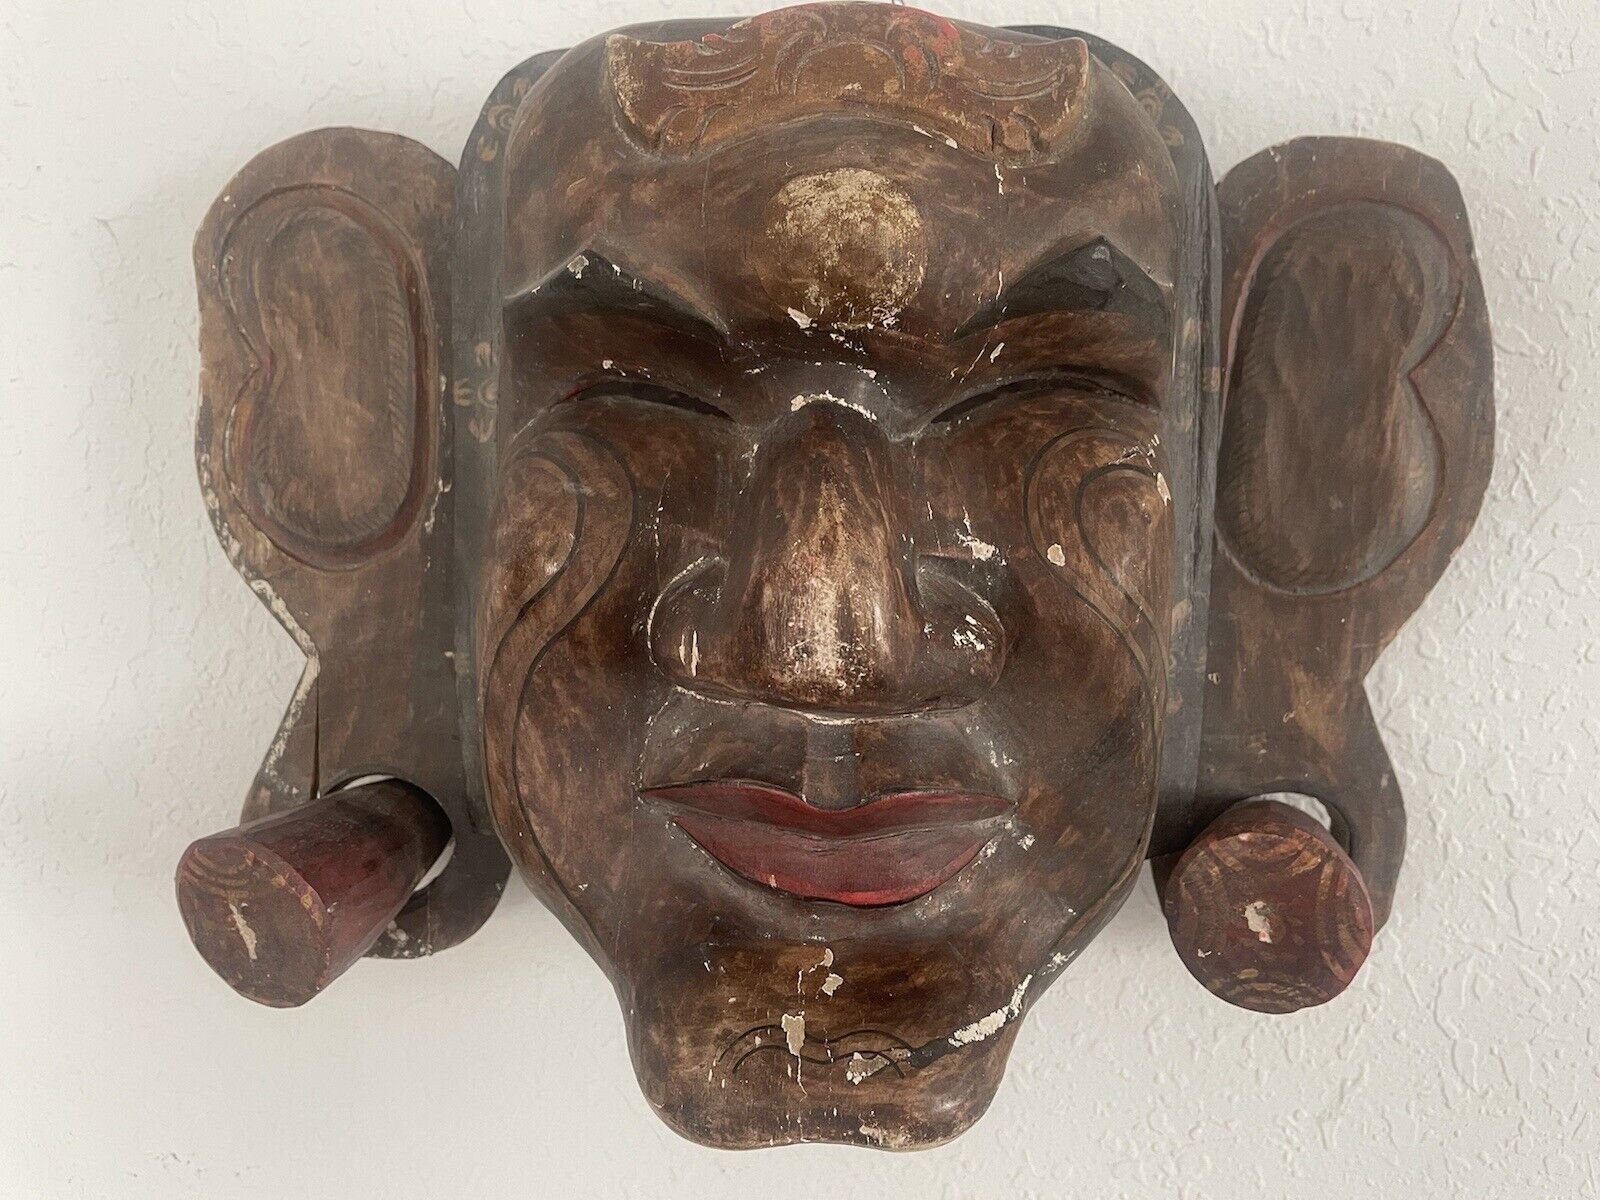 Pair Of 19th C. Hand Carved Masks From Balinese Mythology